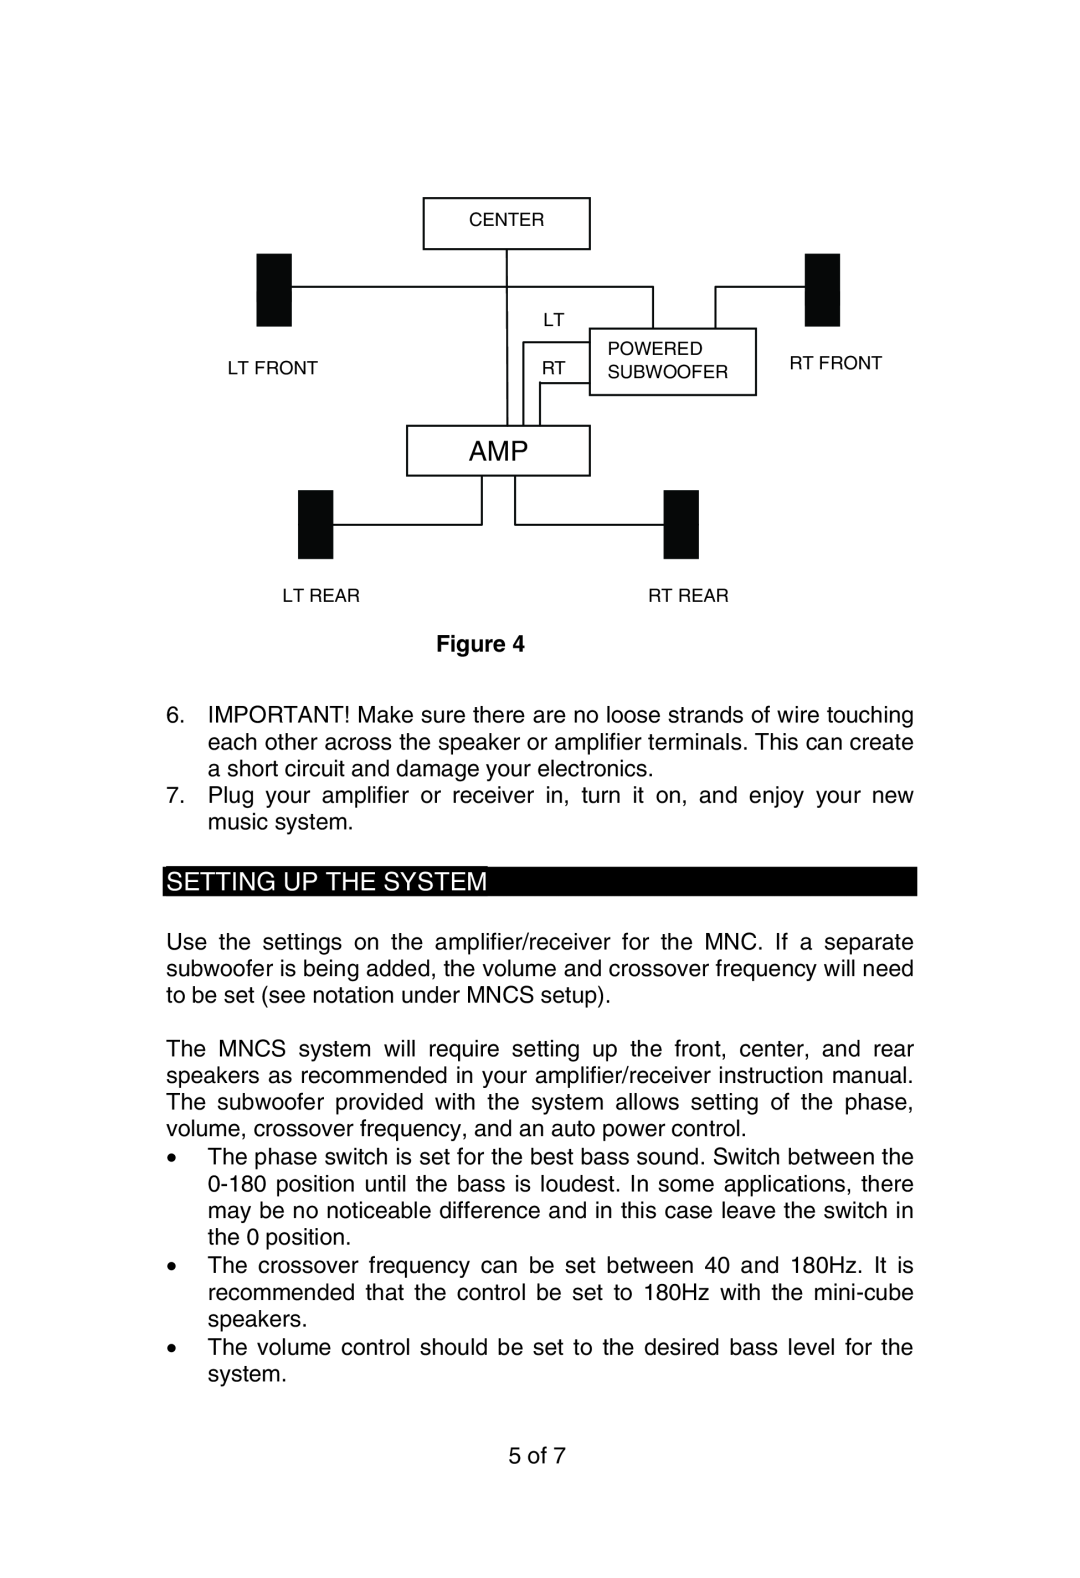 M&S Systems Home Theater System instruction manual Setting Up The System 